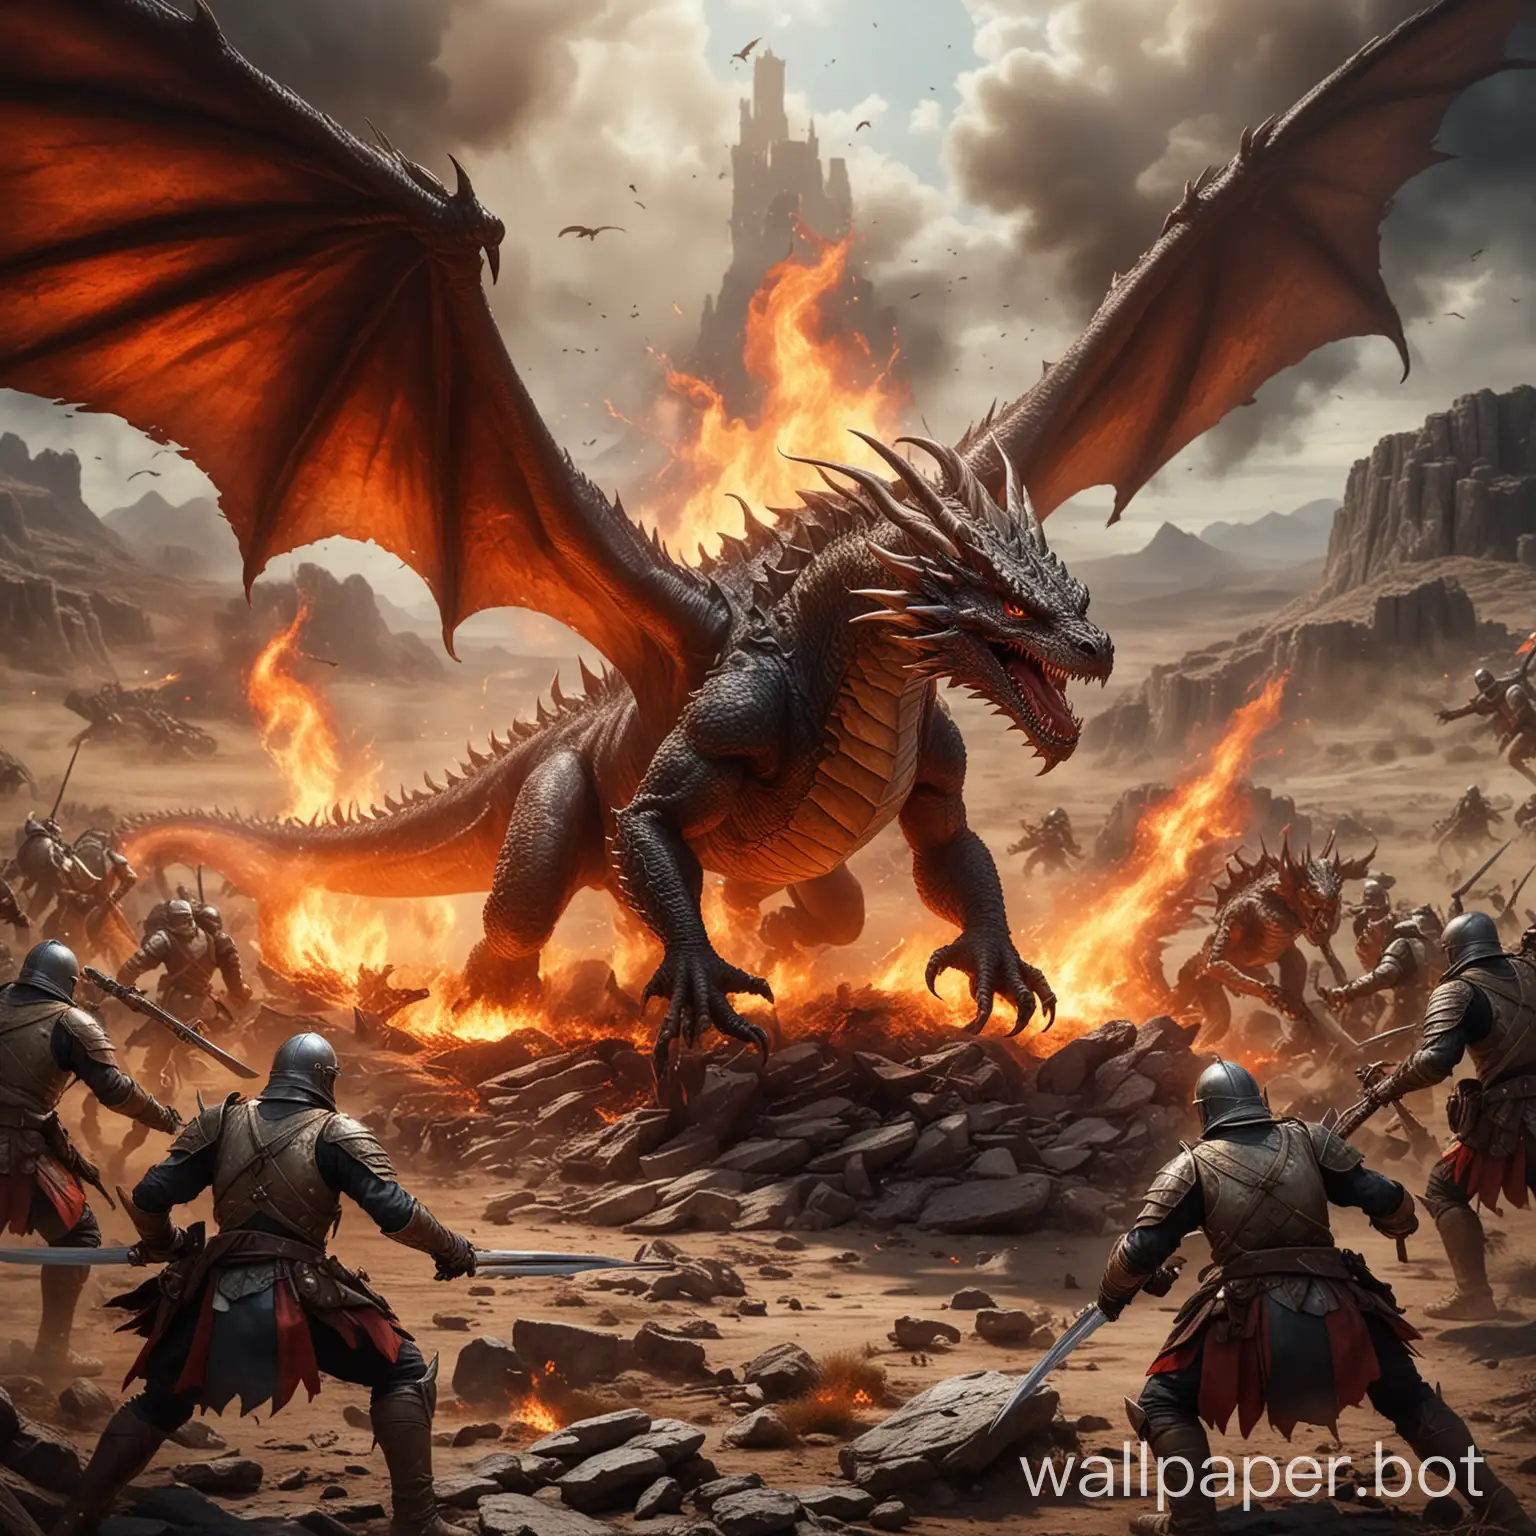 A battlefield with a western dragon fighting soldiers. The dragon is a fire dragon that is large in size with a stance showing off its strengh standing on it back legs with wings out.